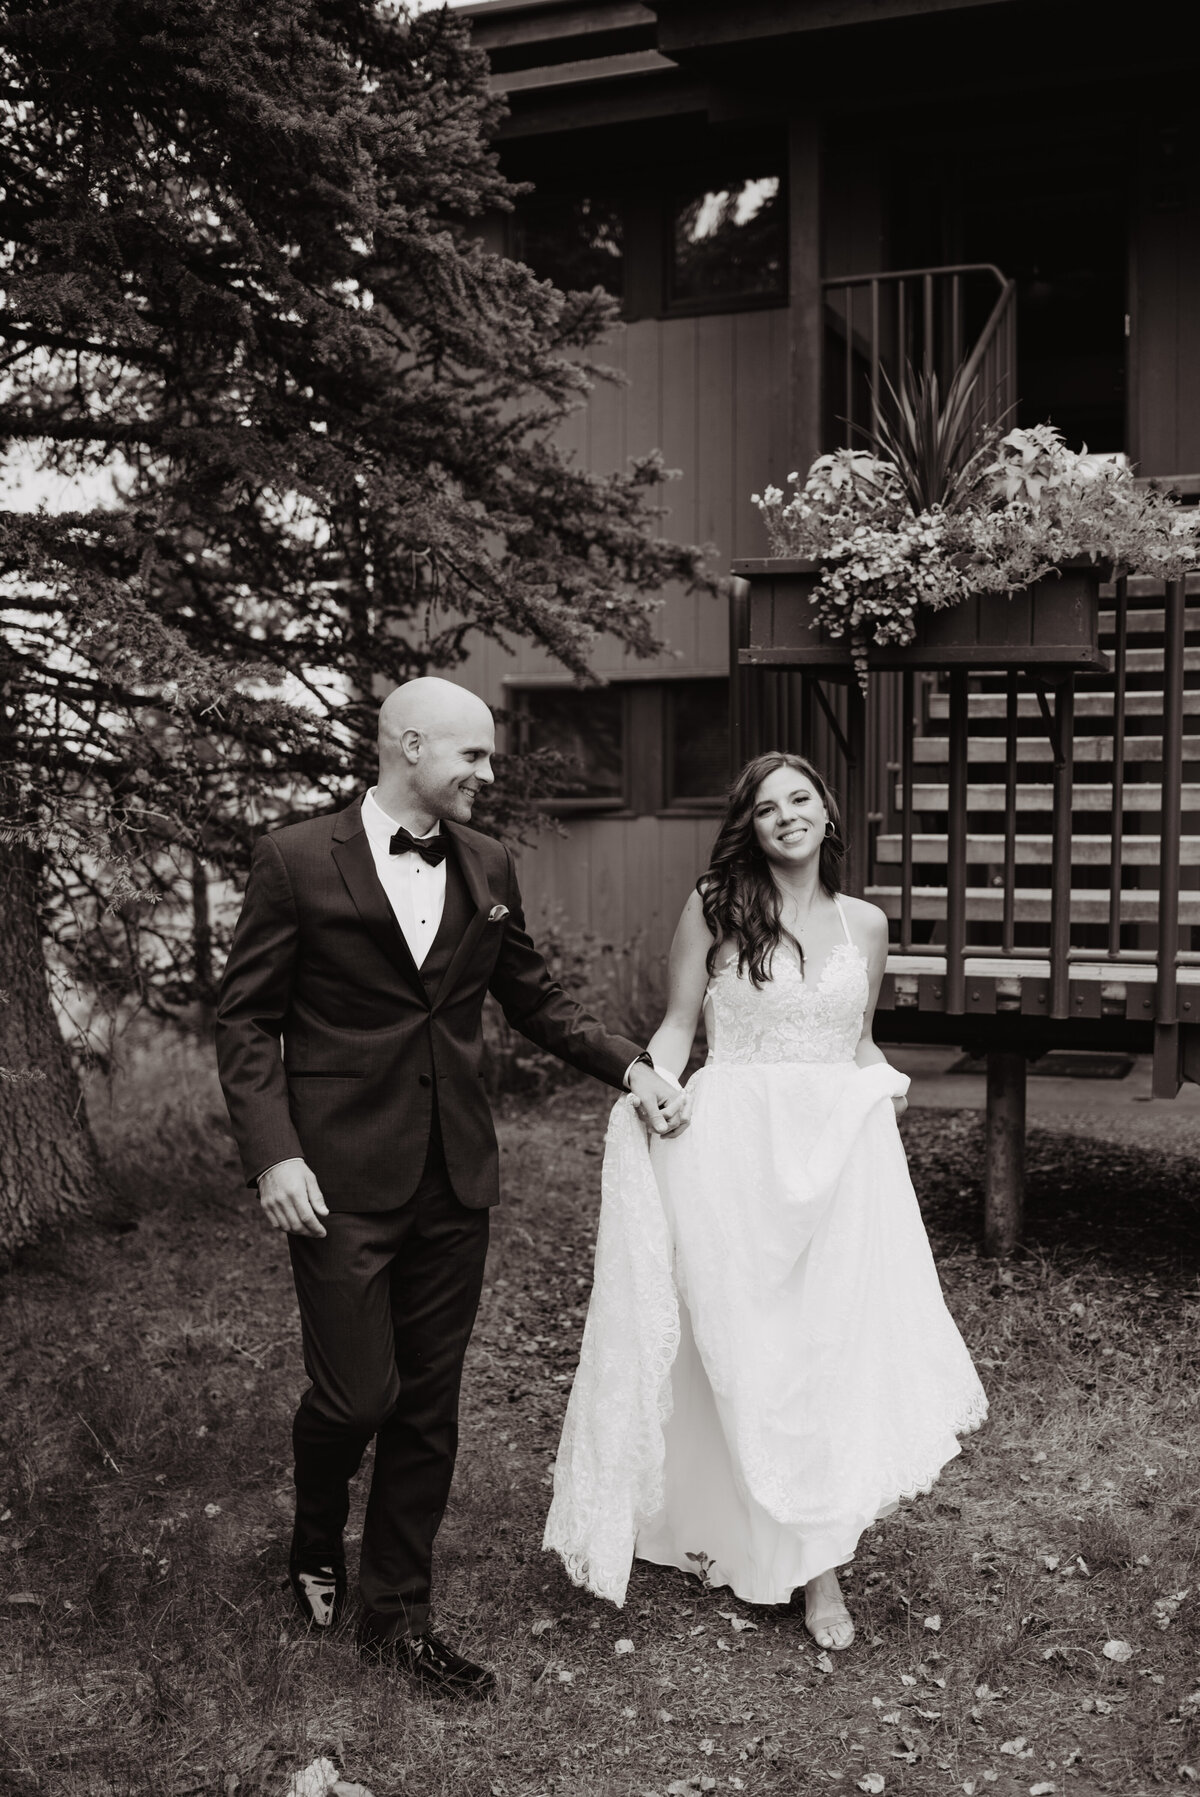 Jackson Hole photographers capture bride and groom walking into forest